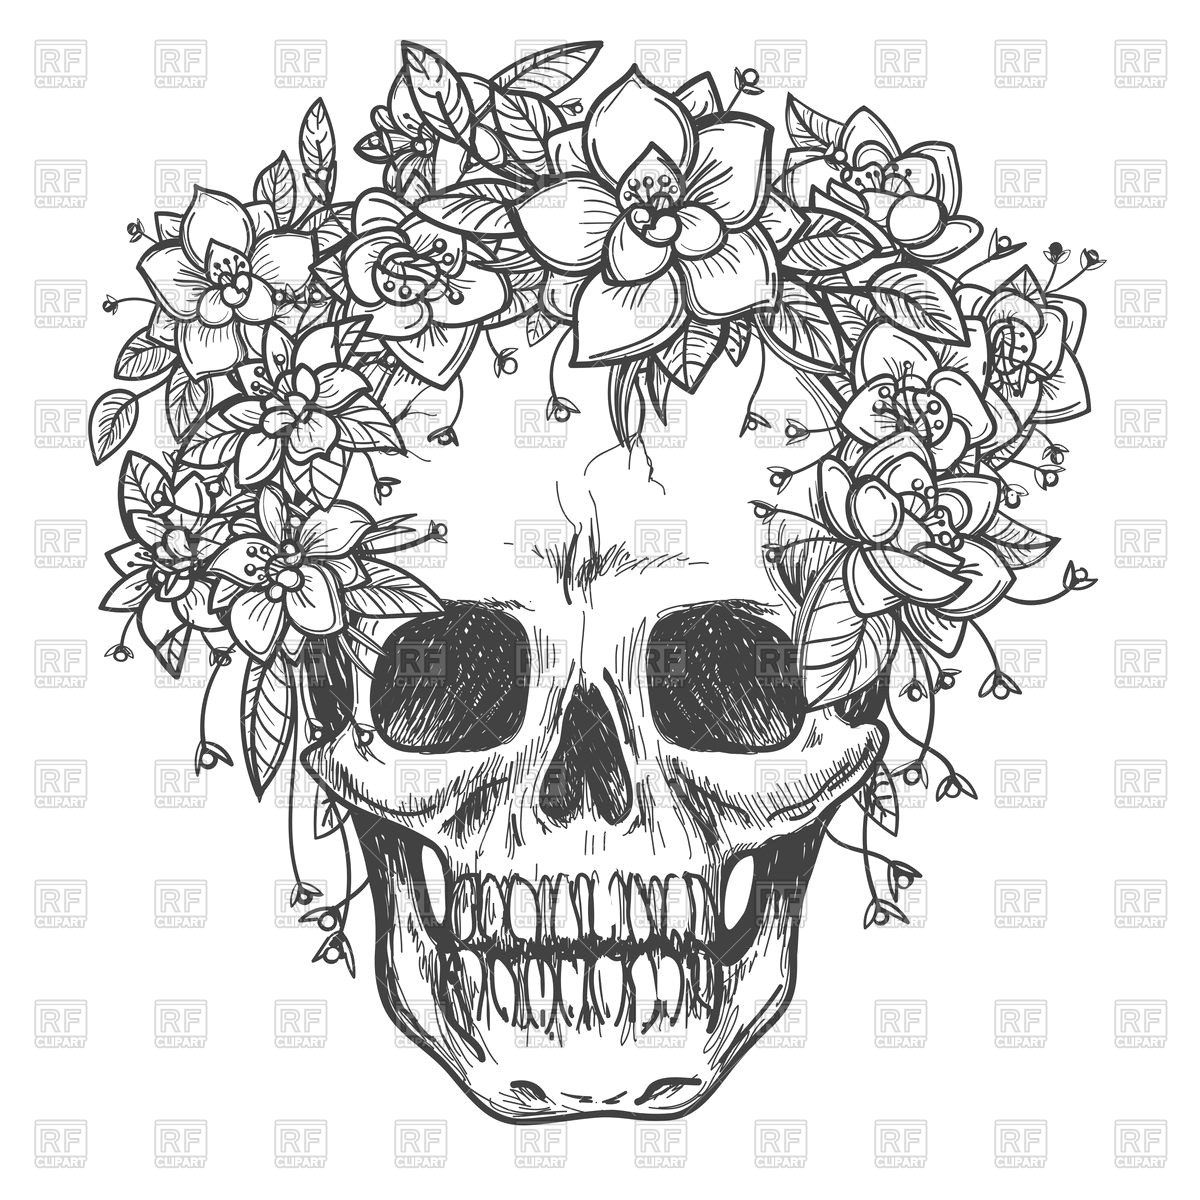 Drawing Of Skull Flowers Hand Drawing Dead Skull with Rose Flowers Vector Illustration Of